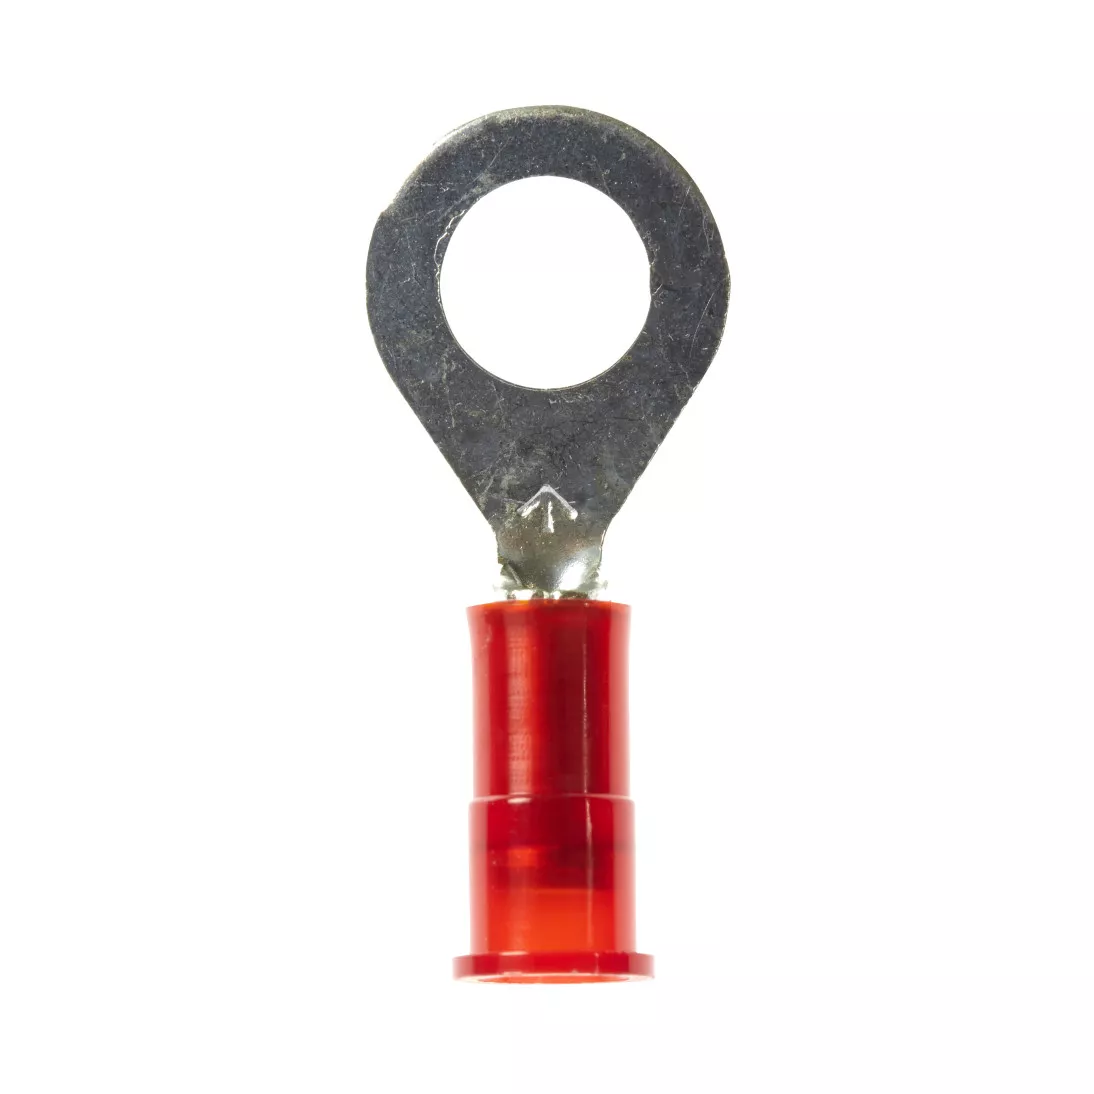 3M™ Scotchlok™ Ring Tongue, Nylon Insulated w/Insulation Grip
MNG18-14R/SK, Stud Size 1/4, 1000/Case